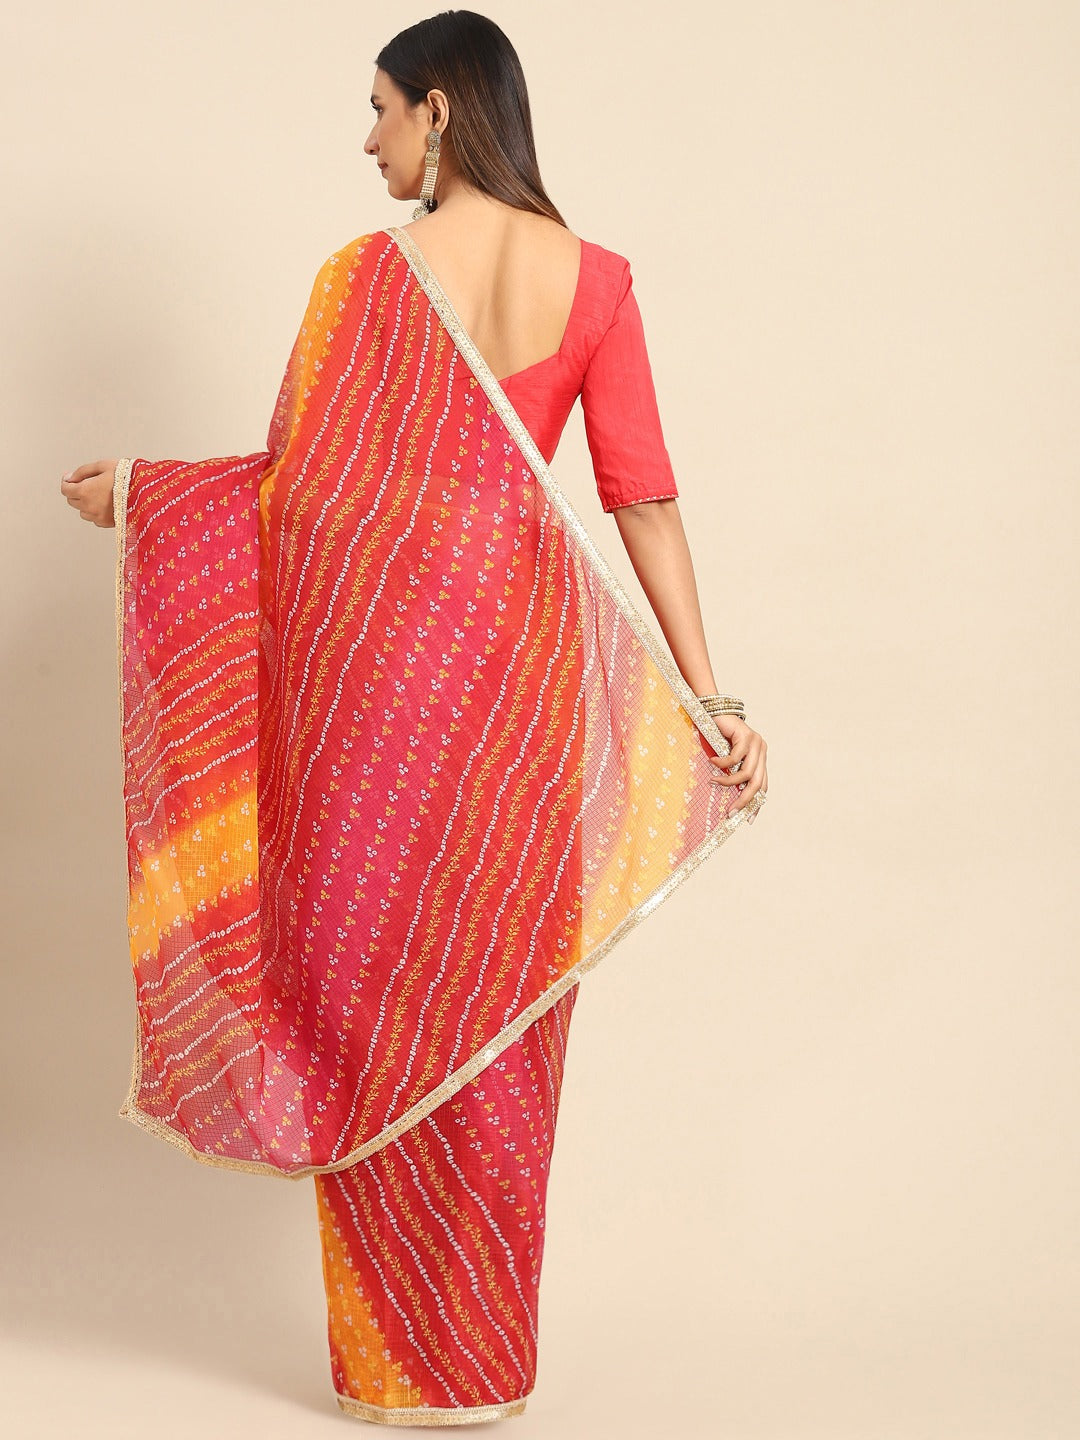 Women's Red Printed Unstitched Blouse Sarees - Yufta